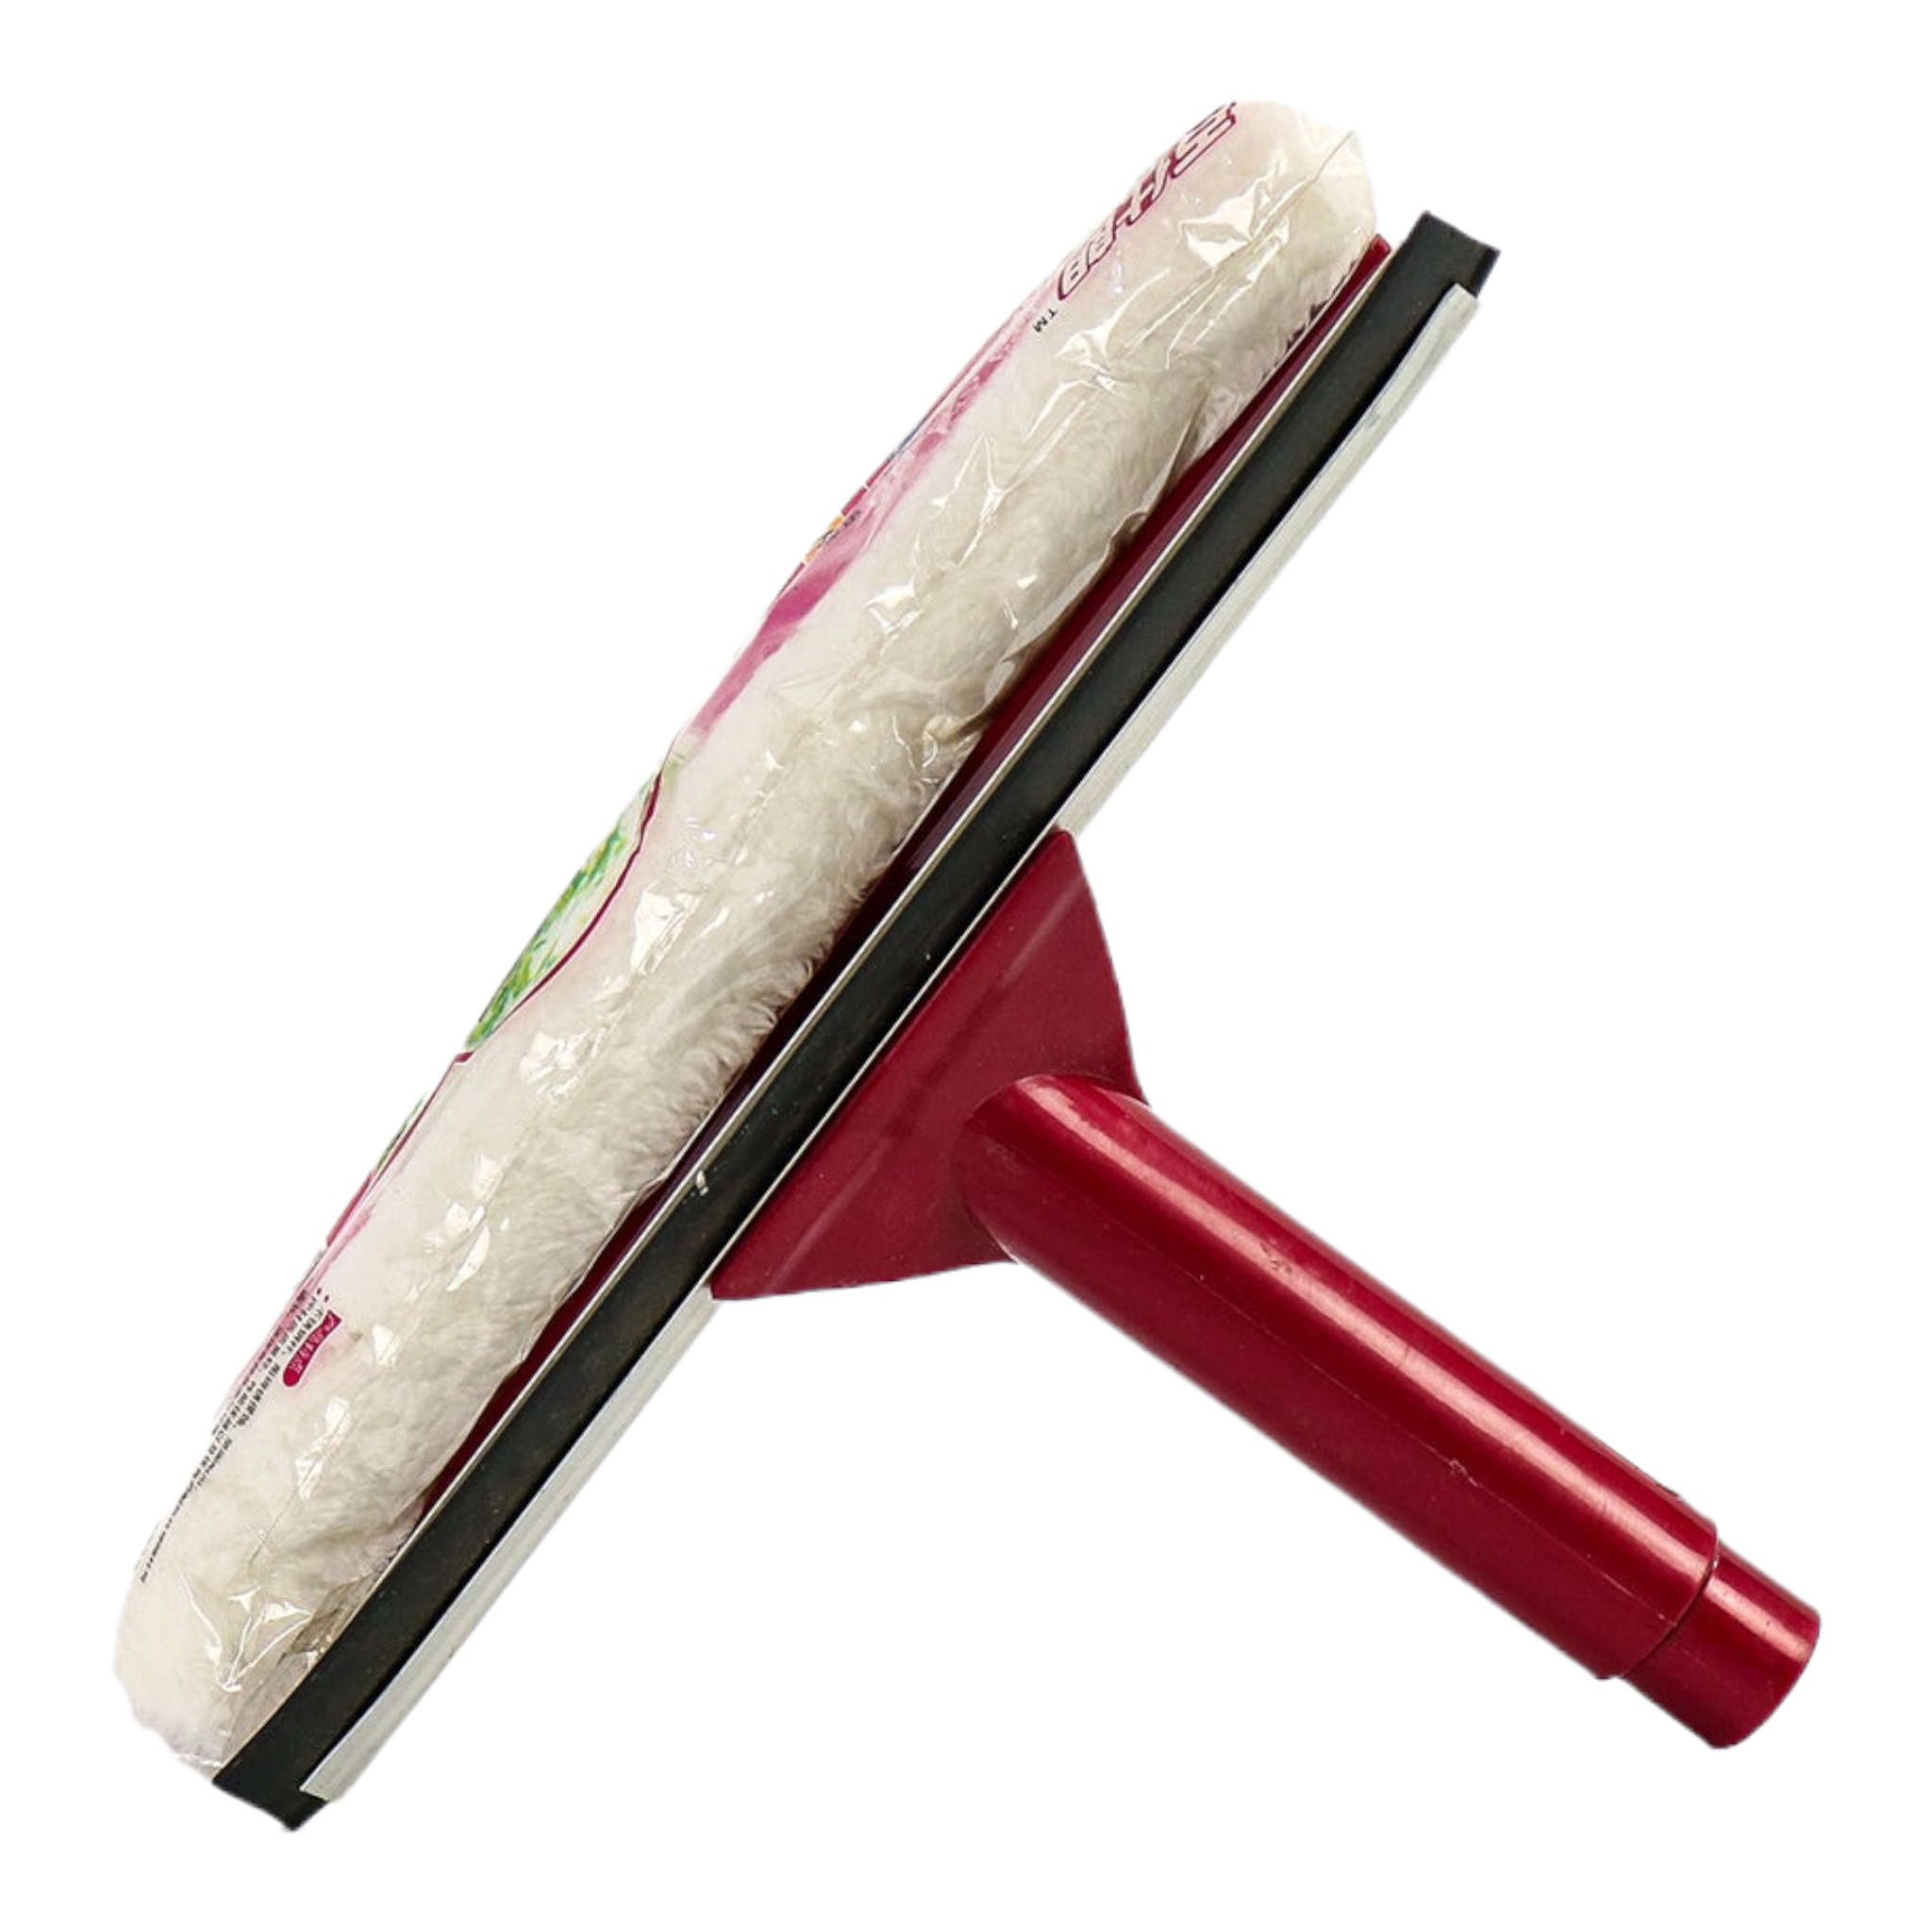 Window Squeegee 2 in 1 Scrubber Extendable Handle